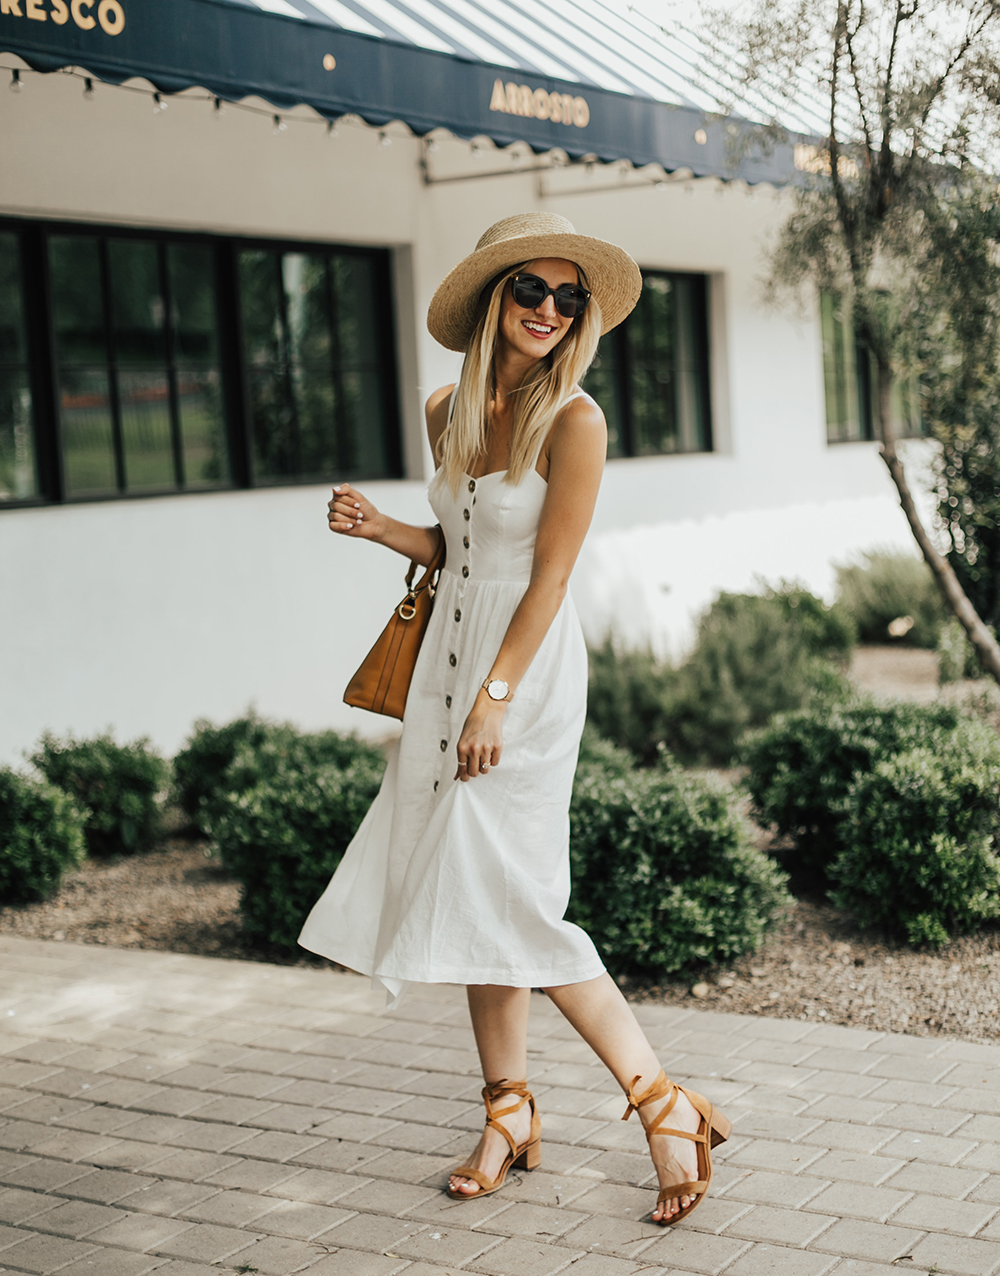 How to Style a Sundress